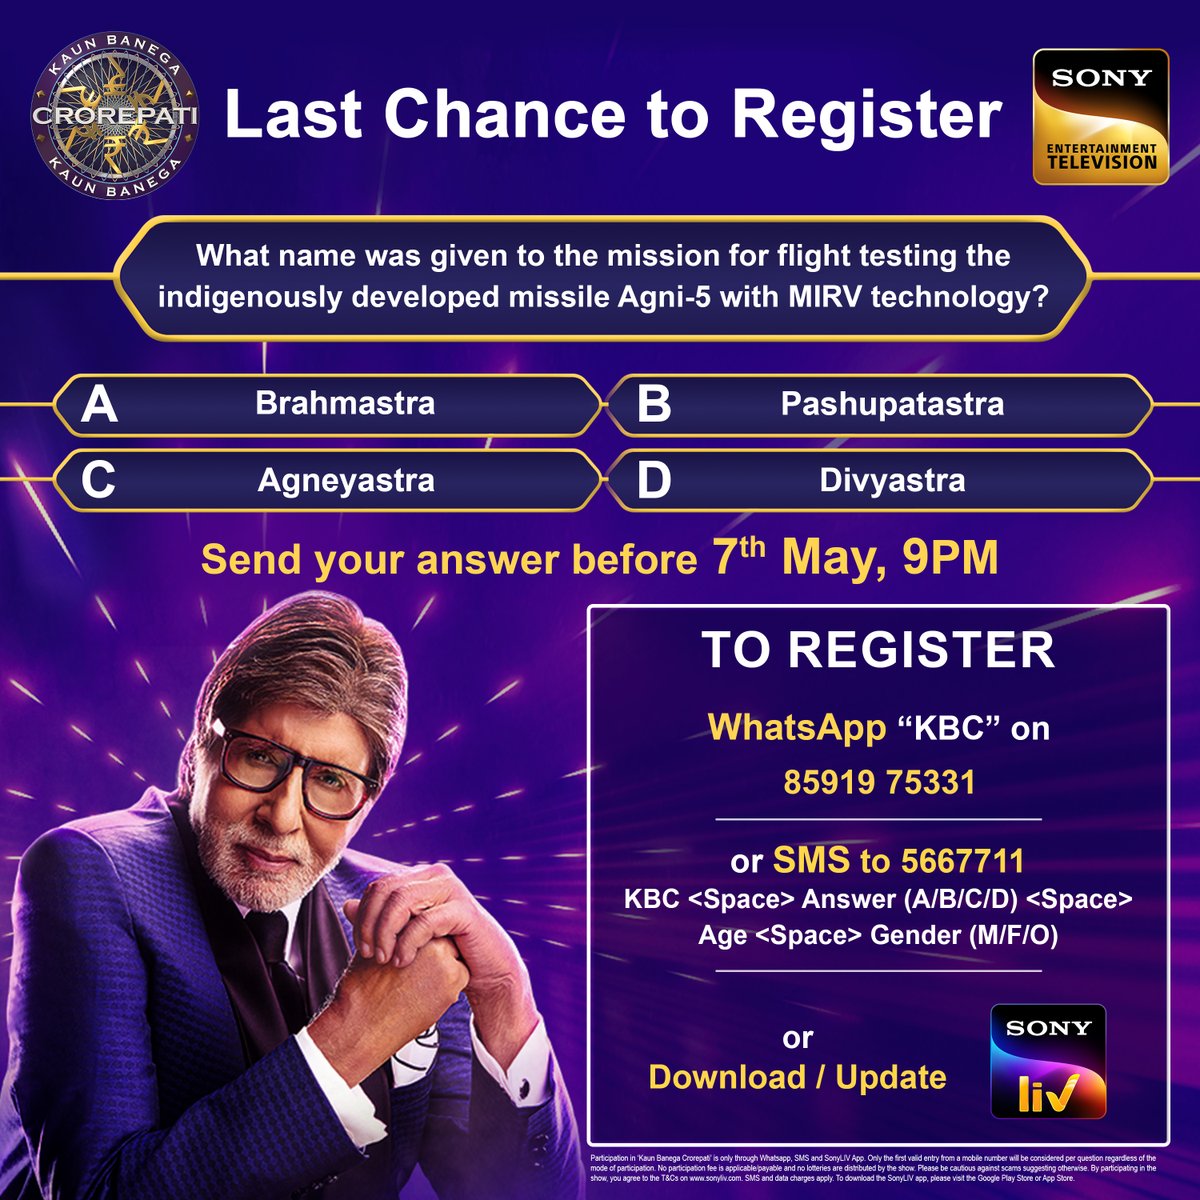 Register before it's too late! To register for KBC, you need to send your answer before tonight, 9 pm. Modes of registration - Whatsapp 'KBC' on 8591975331 OR SMS to 5667711 KBC <space> Answer (A/B/C/D) <space> Age <space> Gender (M/F/O) OR Download/Update SonyLIV App…